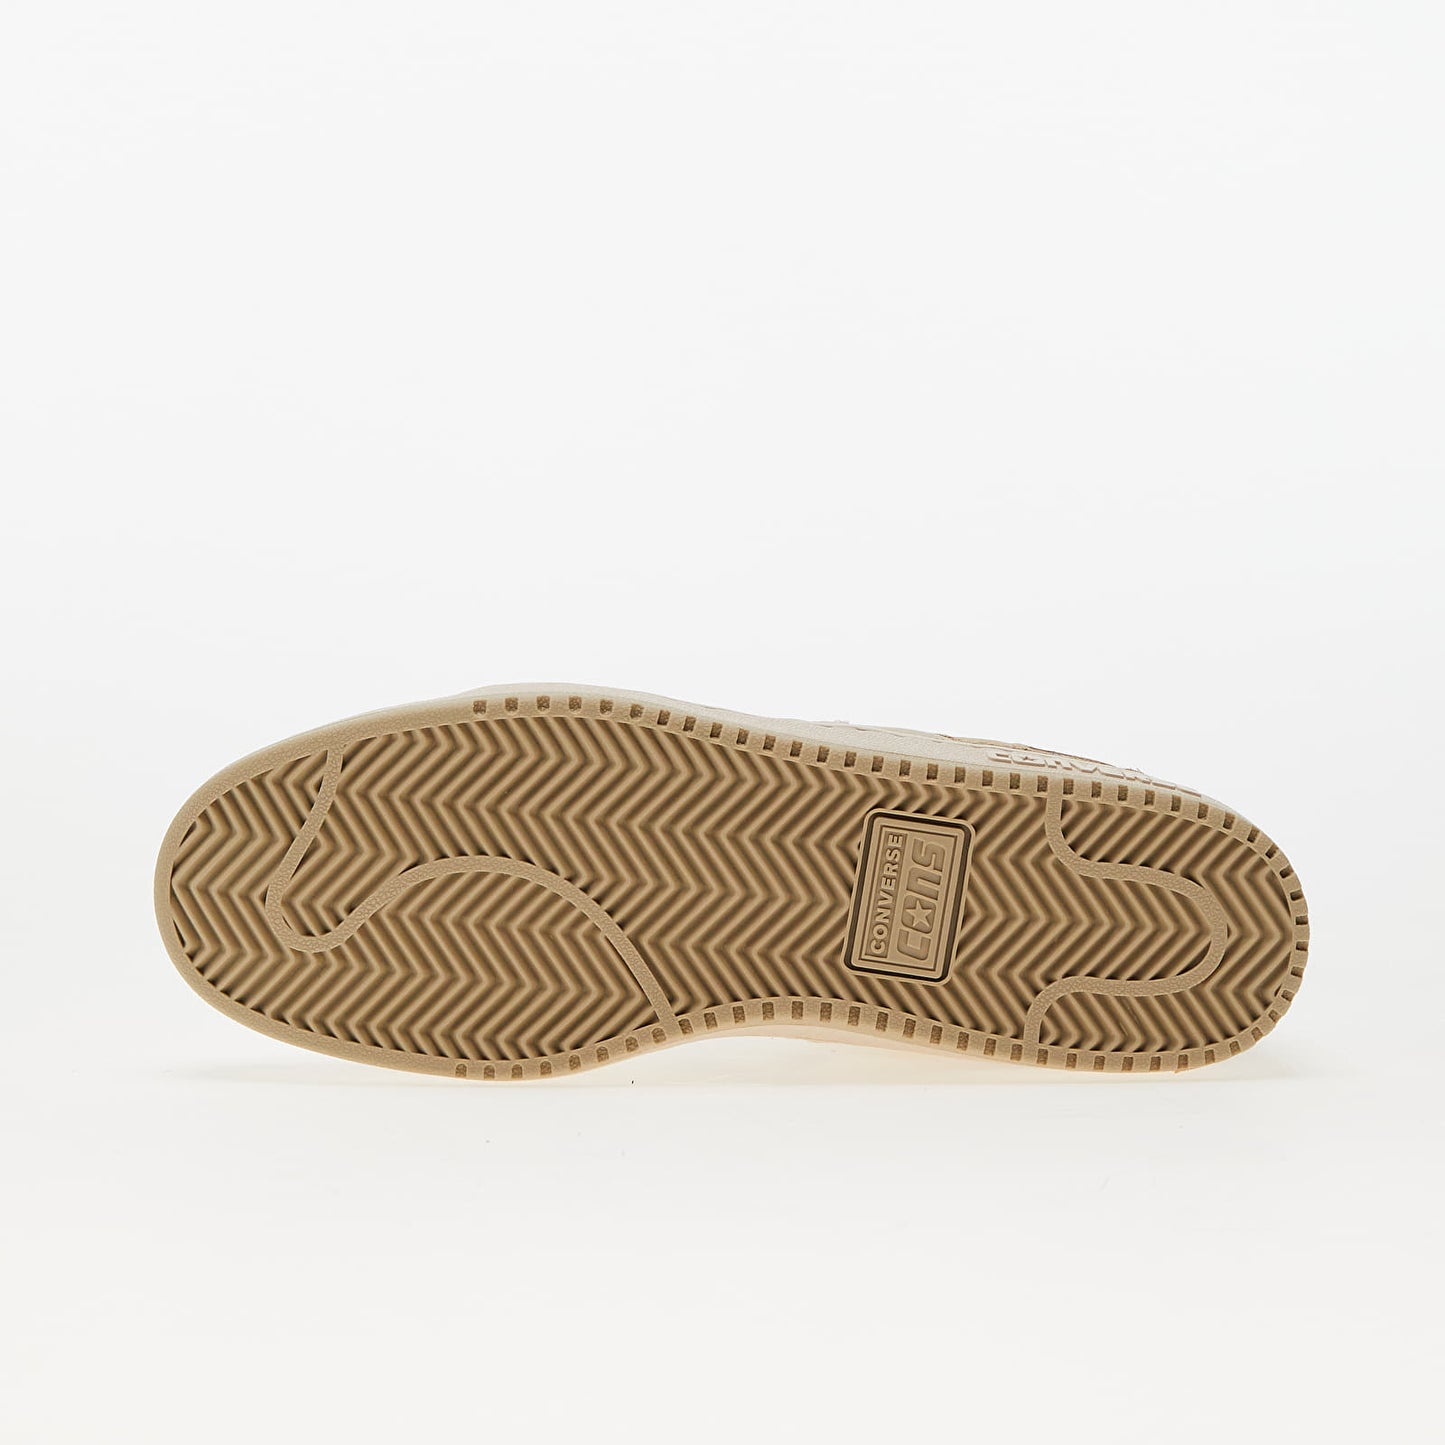 Converse AS-1 Pro Ox Shifting Sand/Warm Sand